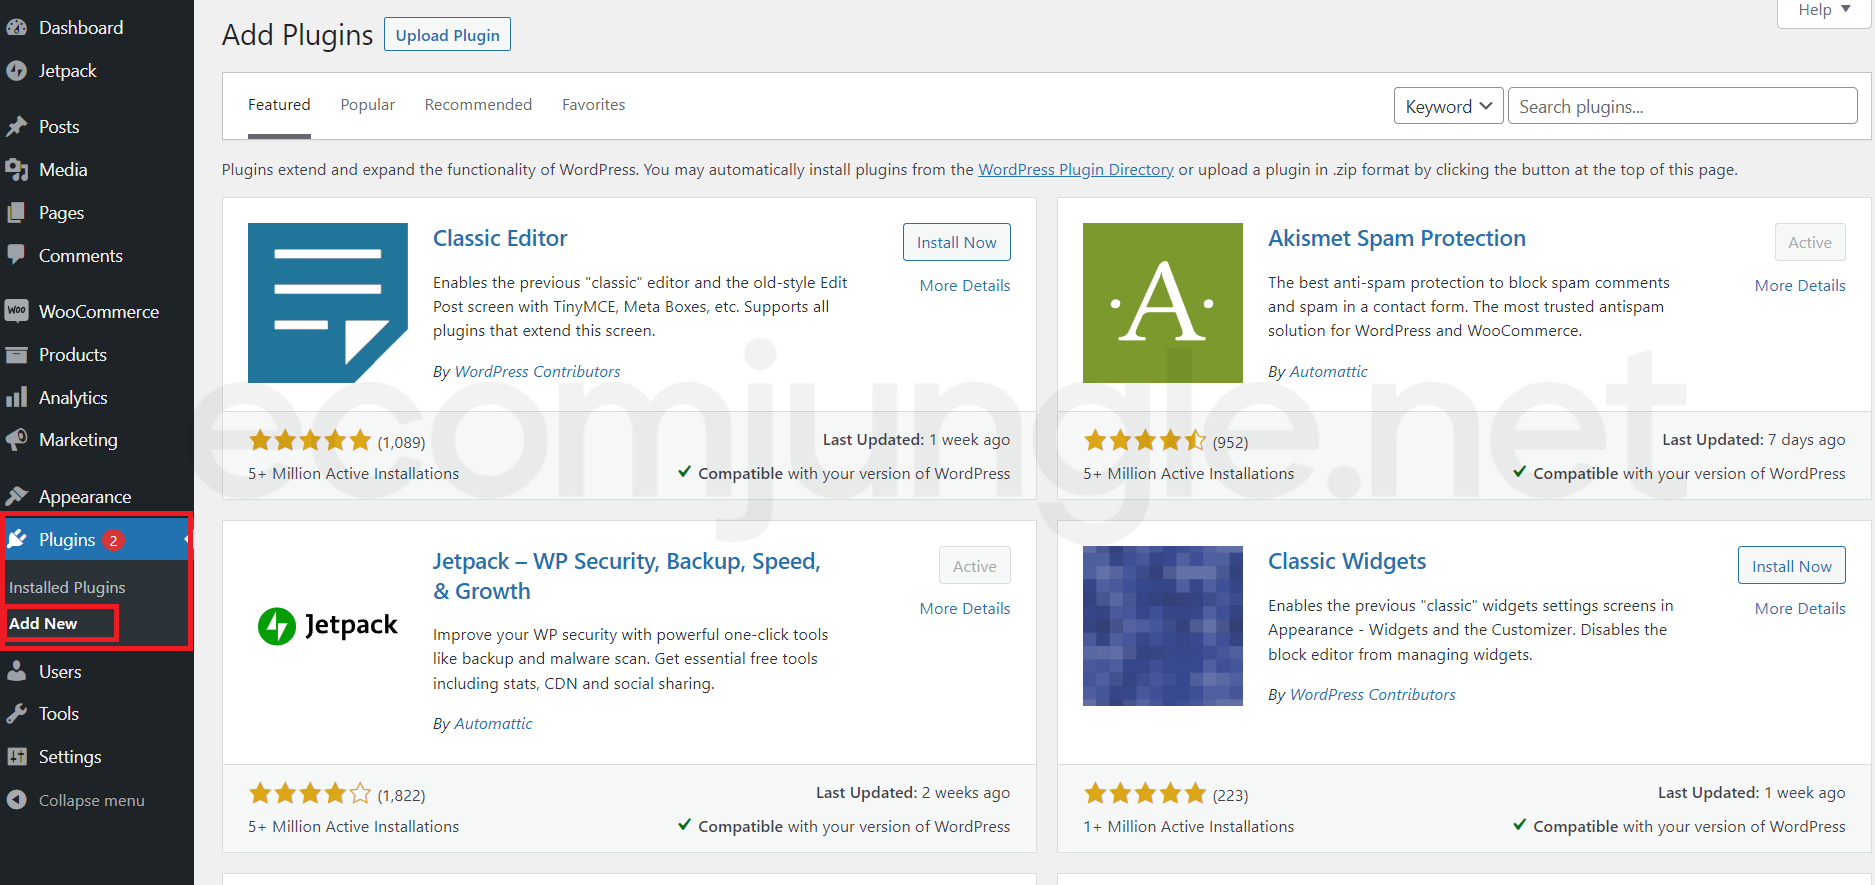 Head to your WordPress dashboard and click Plugins from the sidebar menu. Then click the Add New option